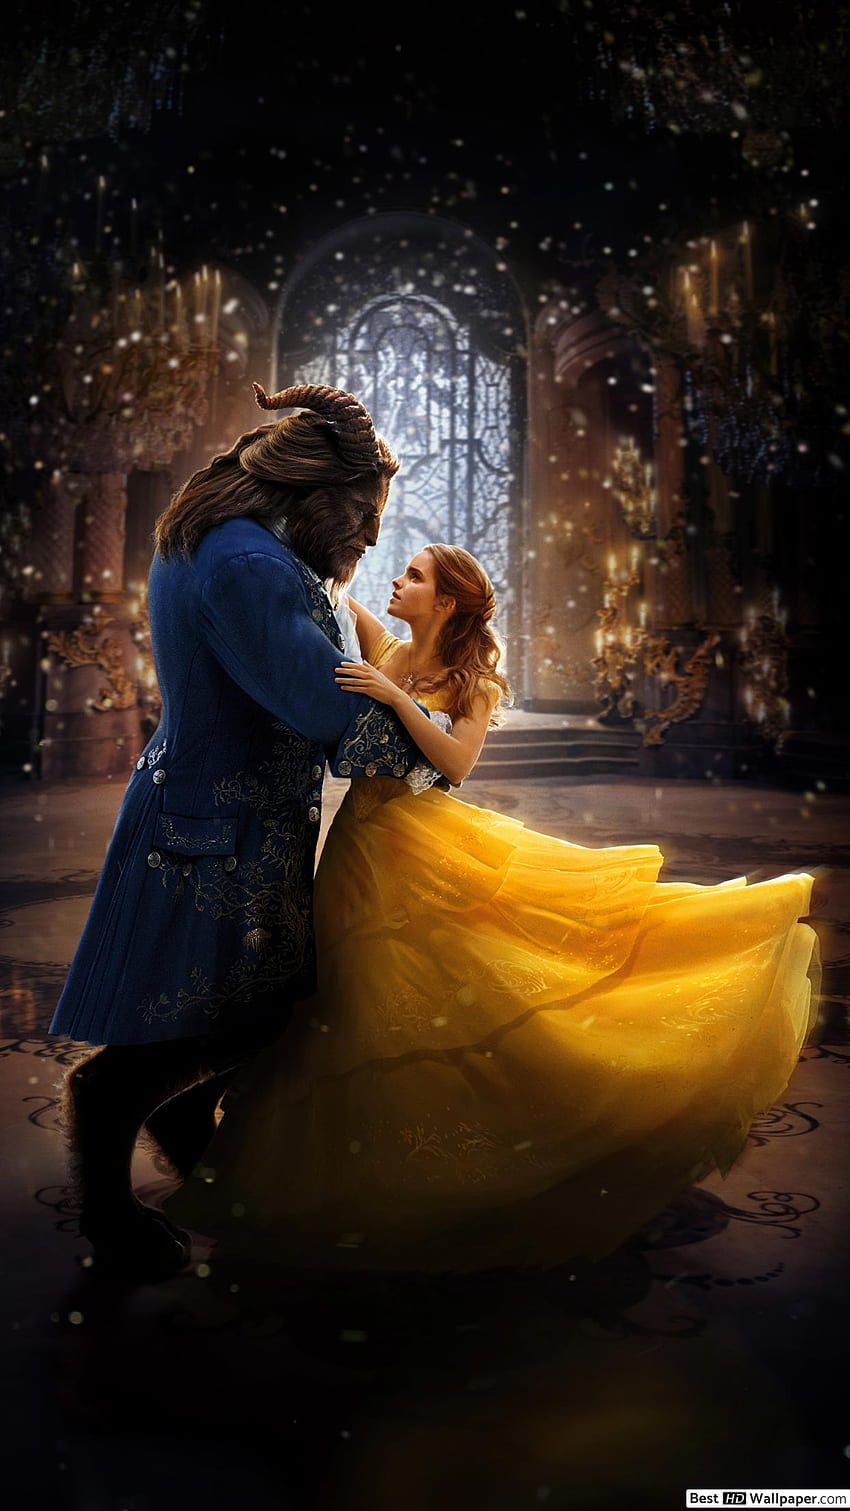 Film Beauty and the Beast 2017 - Tarian Belle and Beast wallpaper ponsel HD